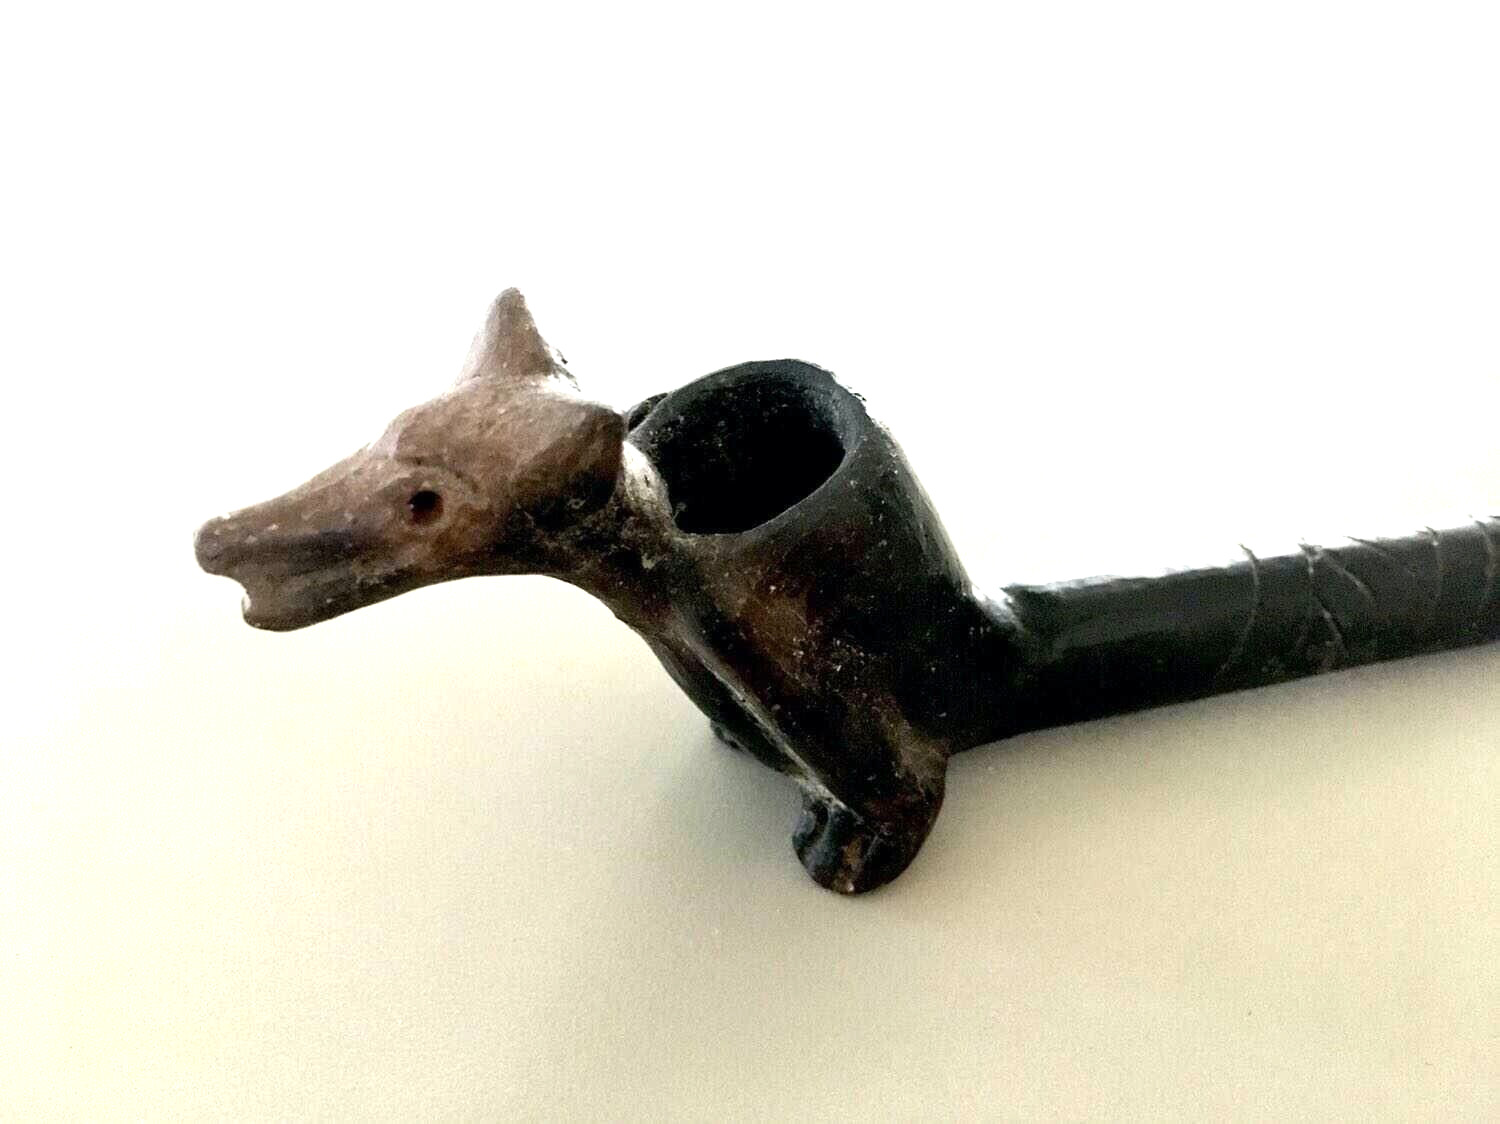 VINTAGE REPRODUCTION OF PRE COLOMBIAN MESO-AMERICAN STYLED TOBACCO PIPE